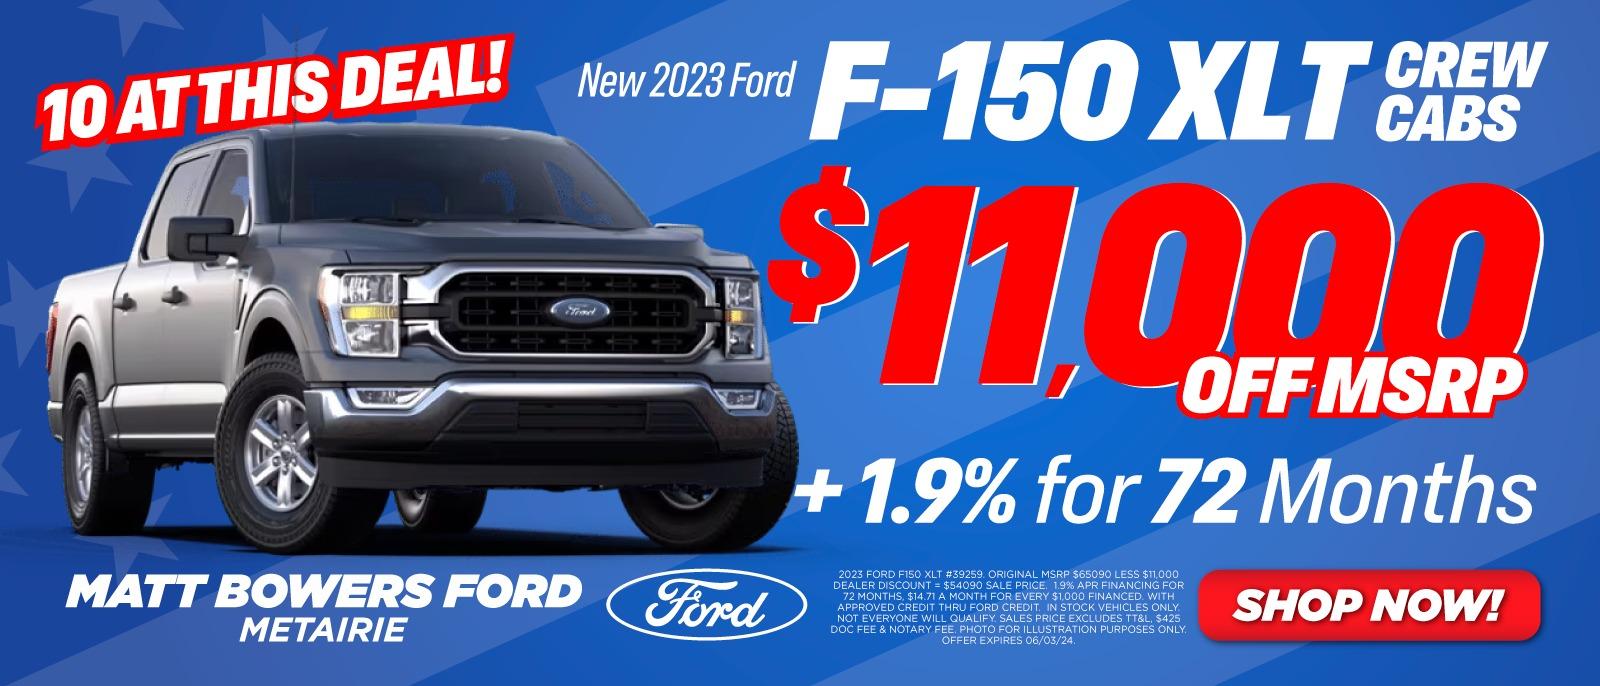 2023 Ford F150 Deal